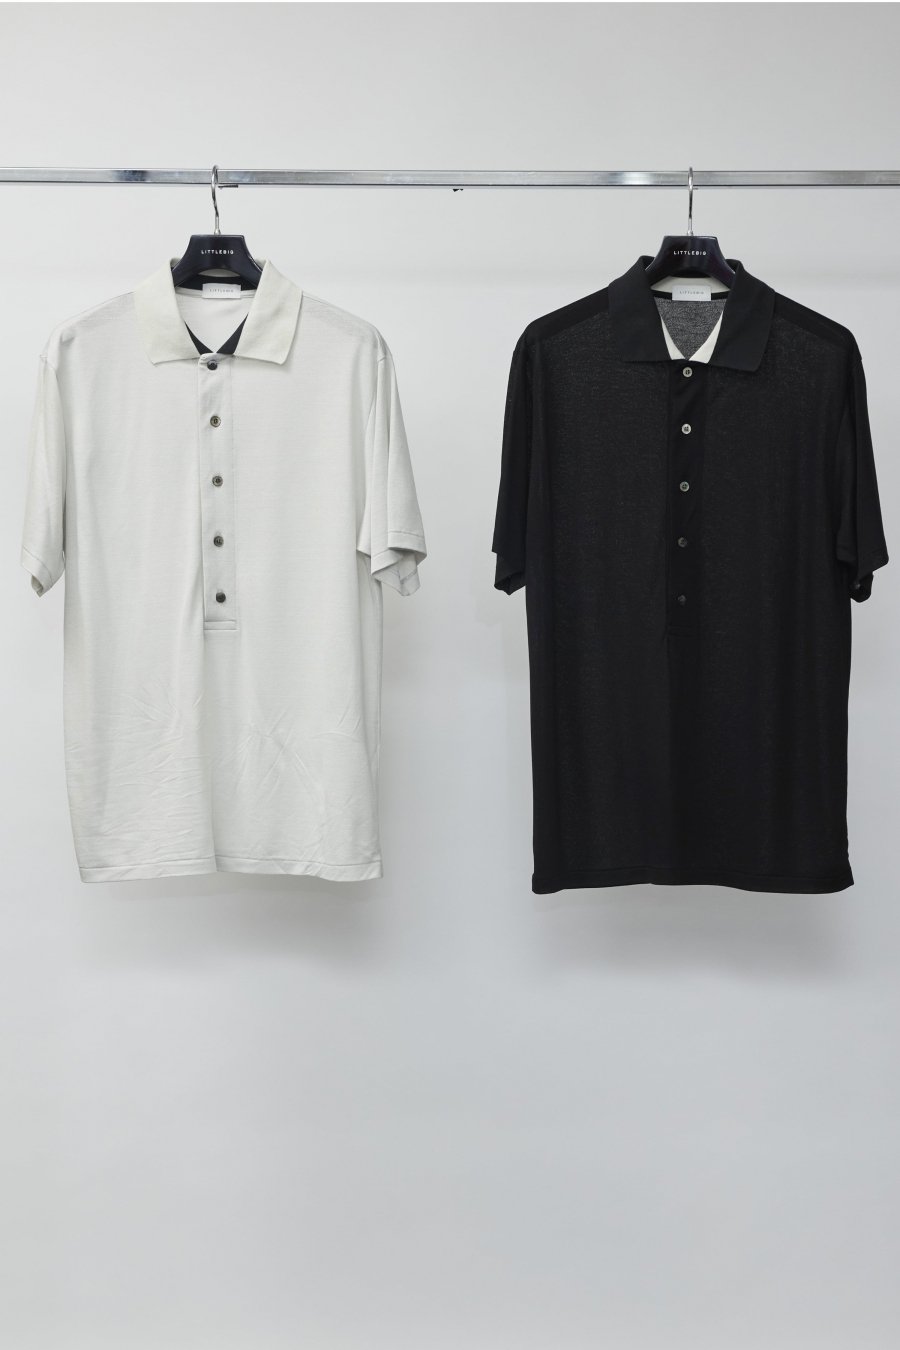 LITTLEBIG  S/S Polo SH（Gray or Black）<img class='new_mark_img2' src='https://img.shop-pro.jp/img/new/icons15.gif' style='border:none;display:inline;margin:0px;padding:0px;width:auto;' />